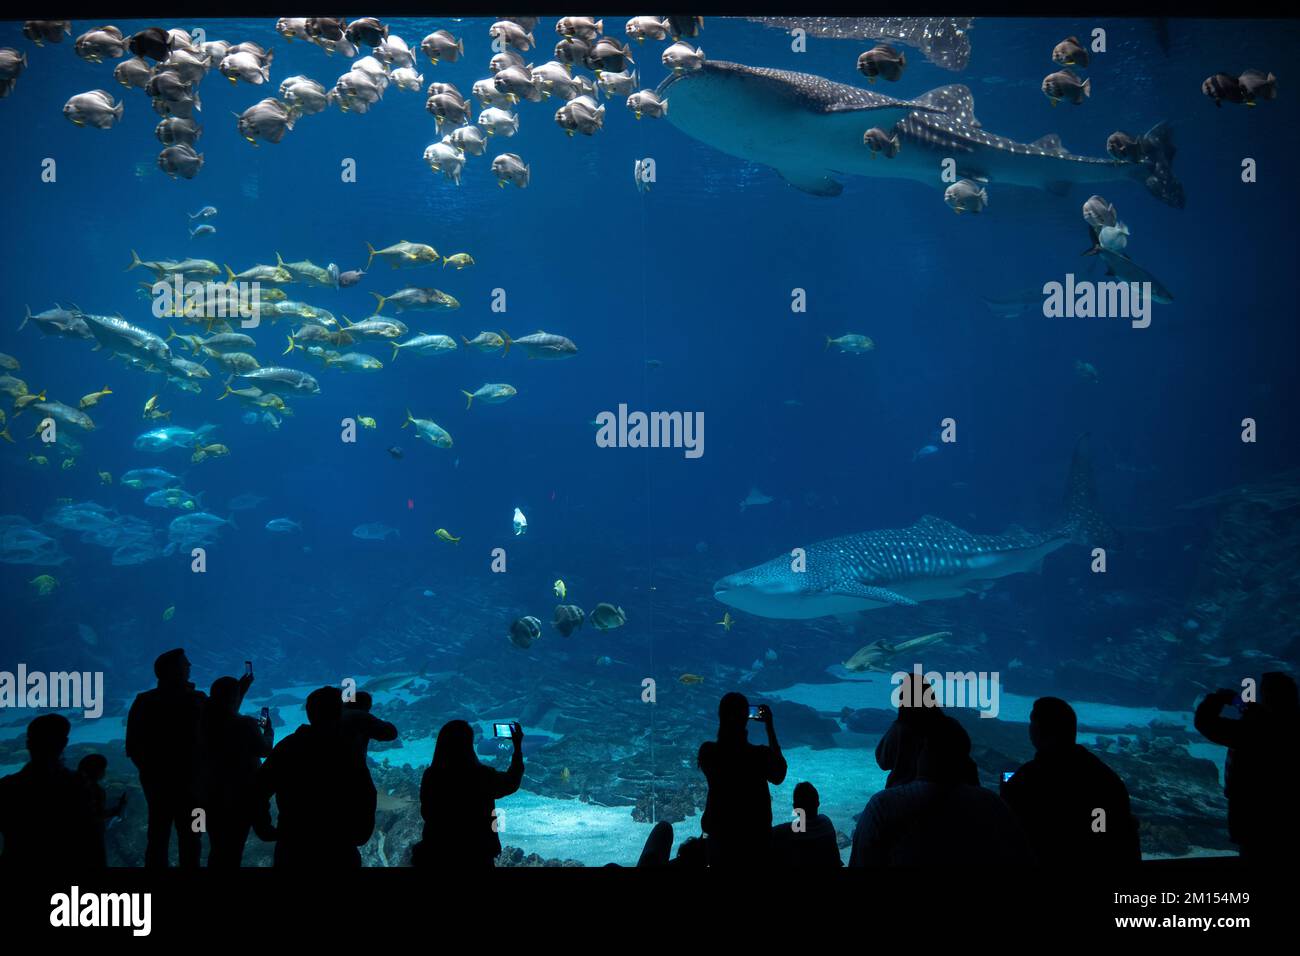 The grand view of the Atlanta Aquarium featuring two whalefish several schools of fish and the silhouettes of visitors enjoying the view Stock Photo